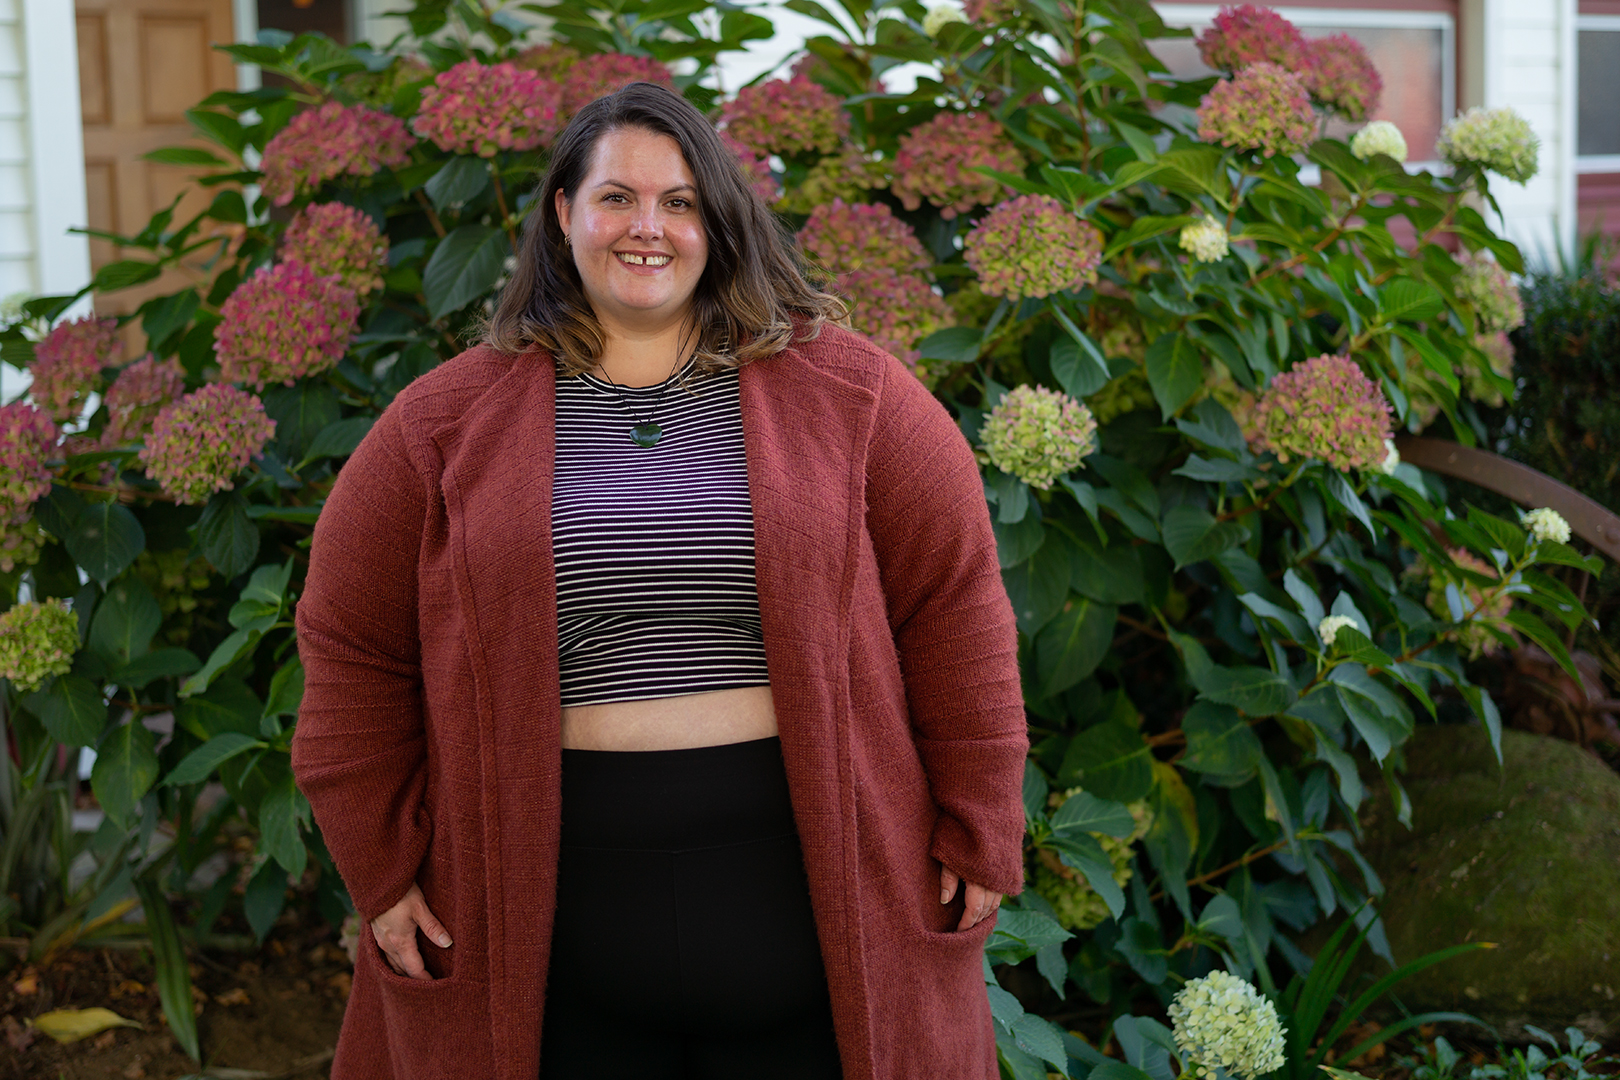 New Zealand plus size blogger Meagan Kerr stands in front of a hydrangrea bush. The photo shows her from her hips upward. Meagan wears a midriff baring City Chic Cheeky Stripe Top in XXL, Snag Tights Leggings in H, Old Navy Rust Cardigan in 4X